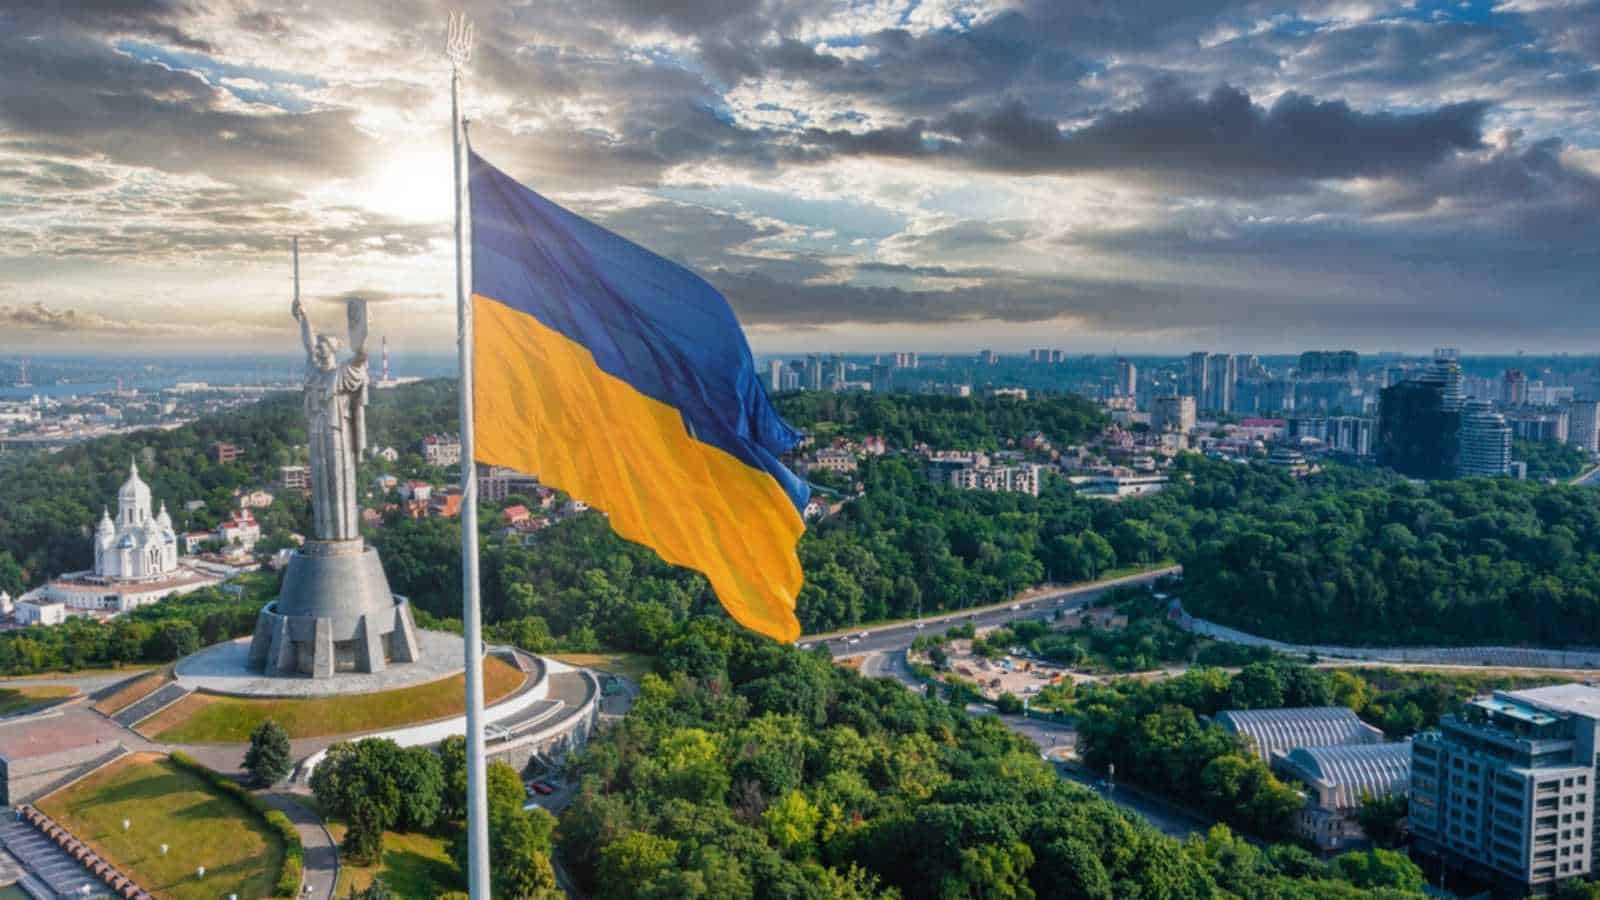 Kyiv, Ukraine. July 10, 2021. Aerial view of the Ukrainian flag waving in the wind against the city of Kyiv, Ukraine near the famous statue of Motherland.